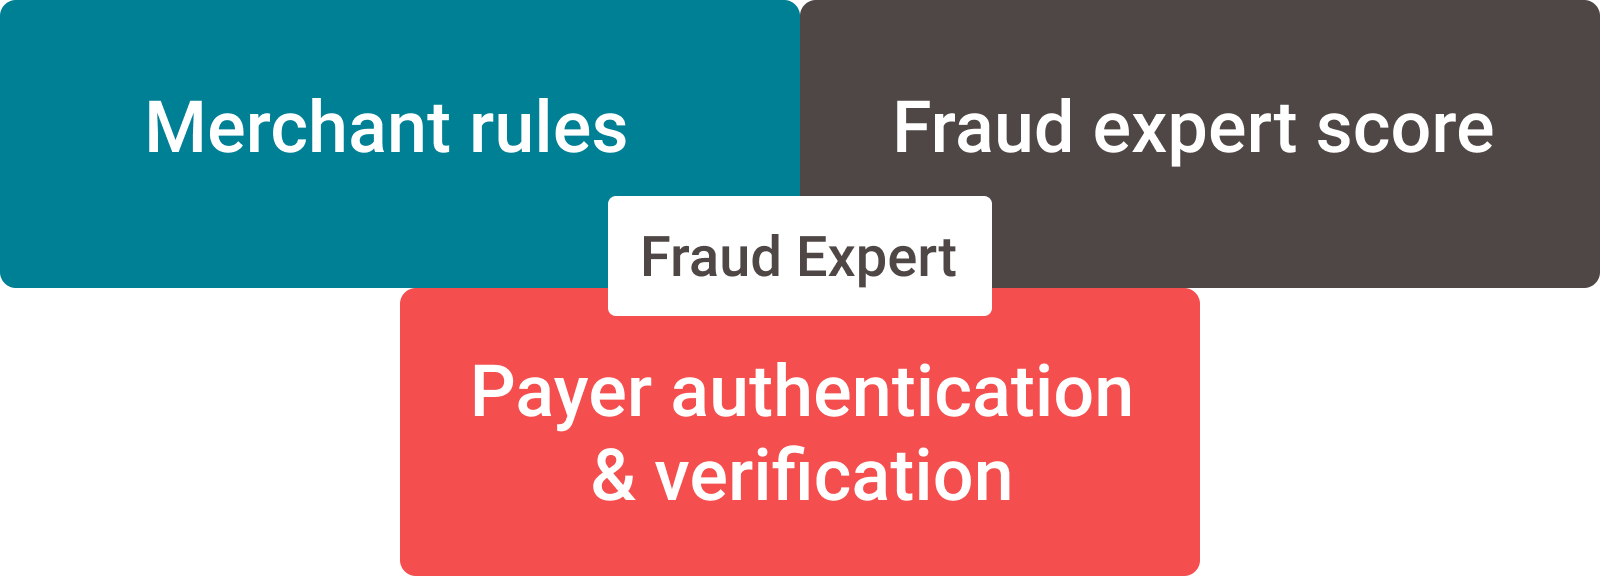 The image above shows a graphical representation of how the three components merchant rules/Fraud Expert score/Payer authentication and verification are combined to the Fraud Expert module.